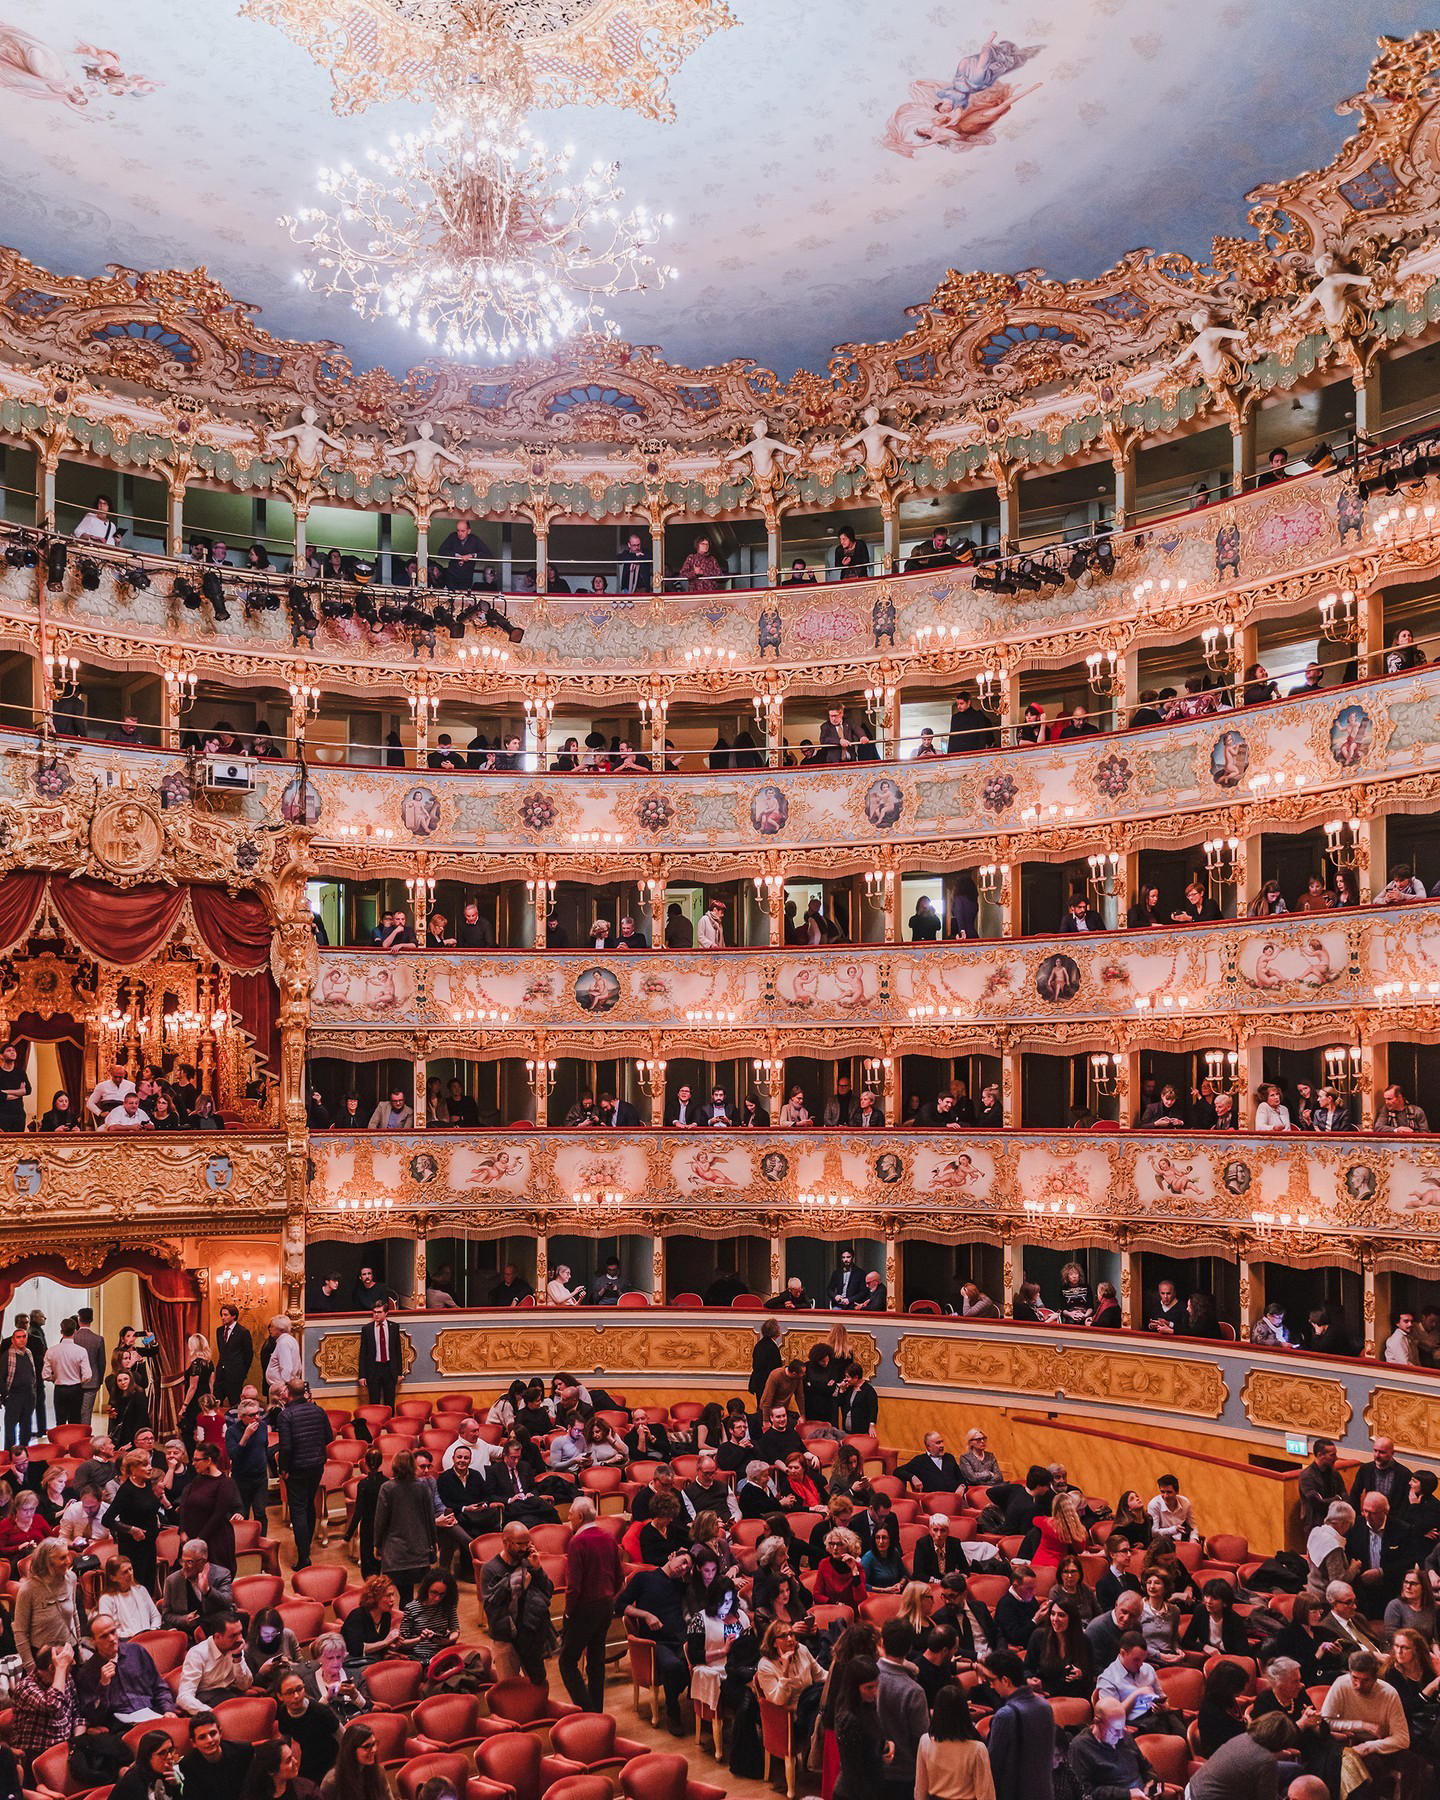 The Gran Teatro La Fenice is the highlight of the holiday season with amazing concerts and performan